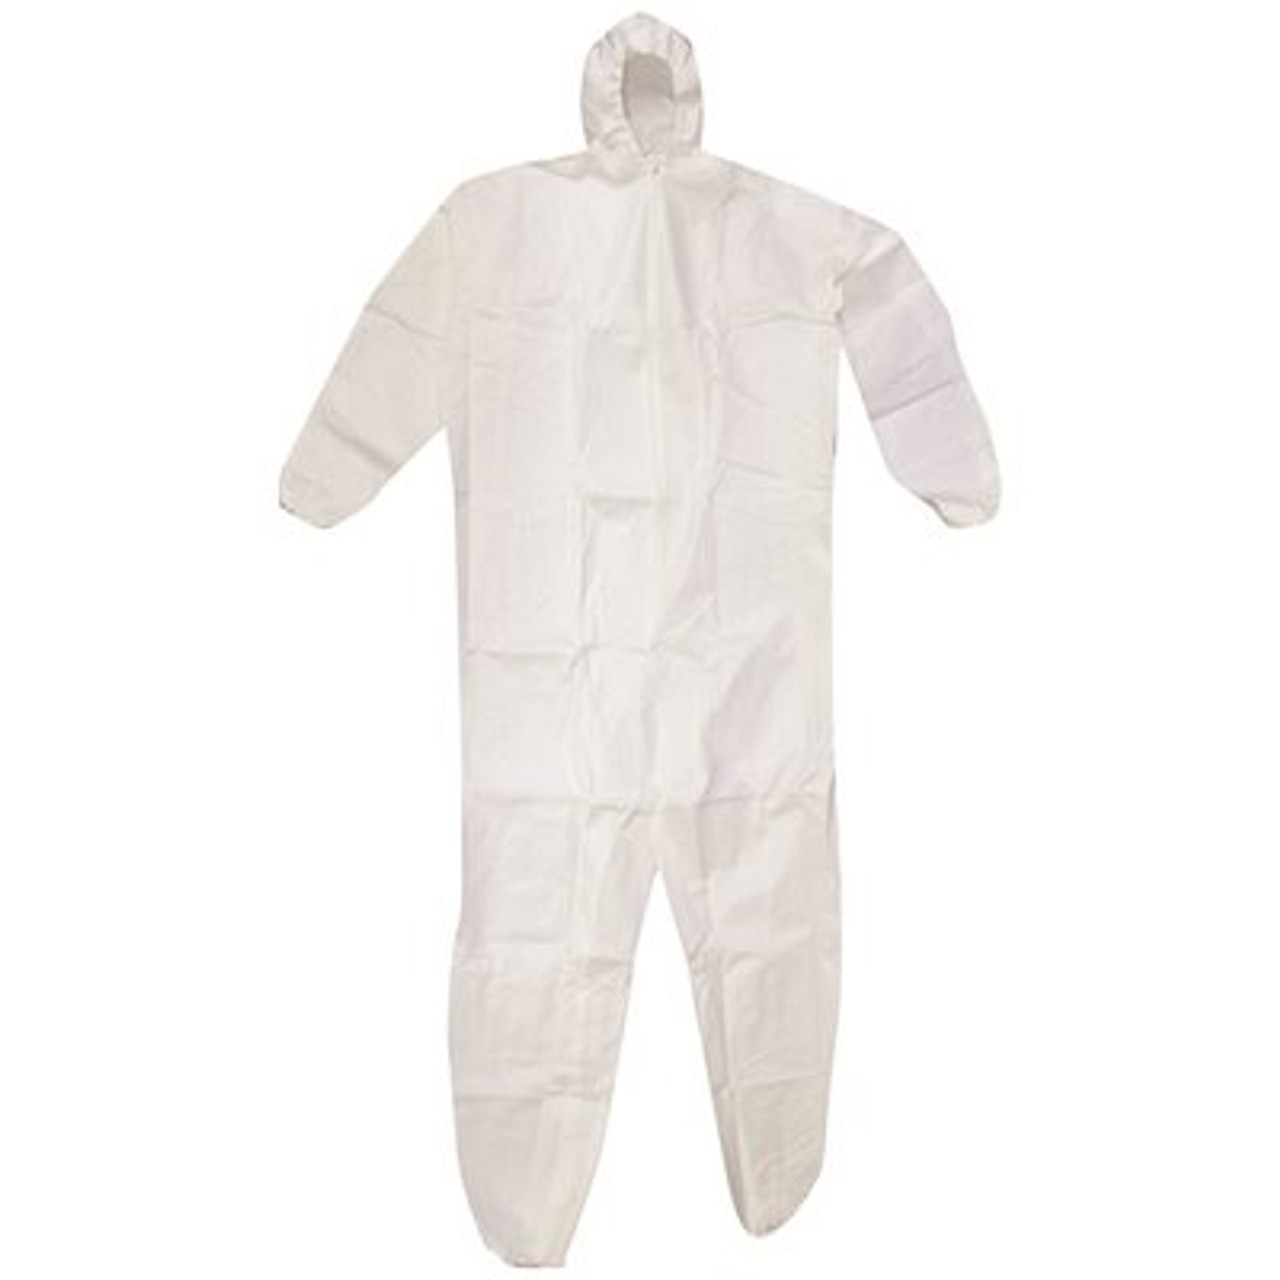 Trimaco Supertuff White Heavy Duty Painter's Coverall With Hood, Large